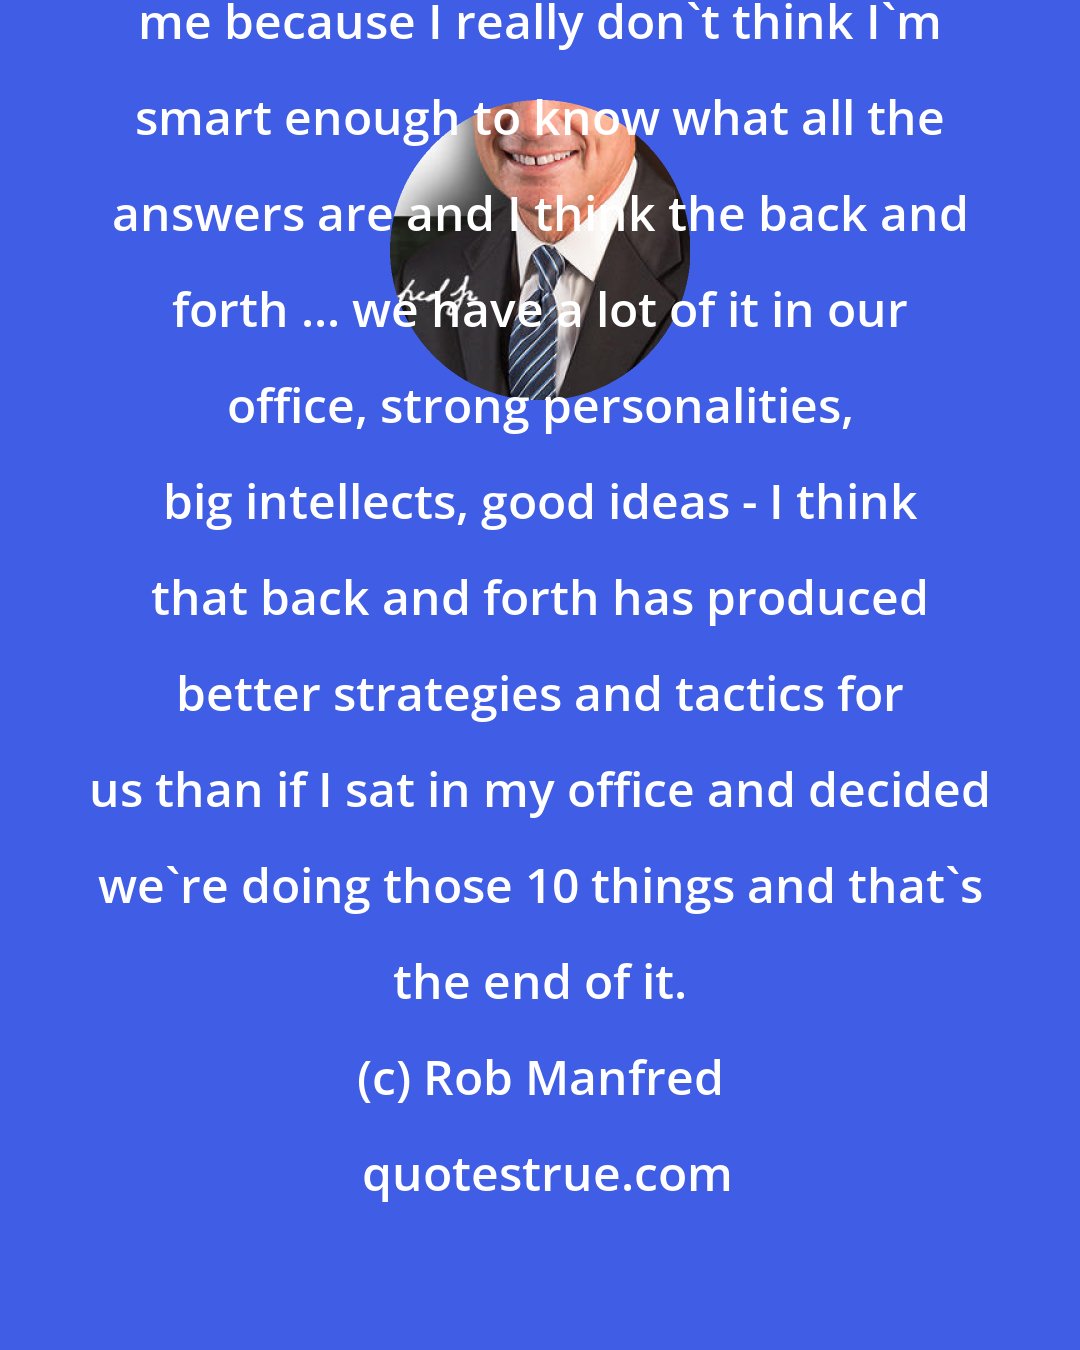 Rob Manfred: I prefer people to disagree with me because I really don't think I'm smart enough to know what all the answers are and I think the back and forth ... we have a lot of it in our office, strong personalities, big intellects, good ideas - I think that back and forth has produced better strategies and tactics for us than if I sat in my office and decided we're doing those 10 things and that's the end of it.